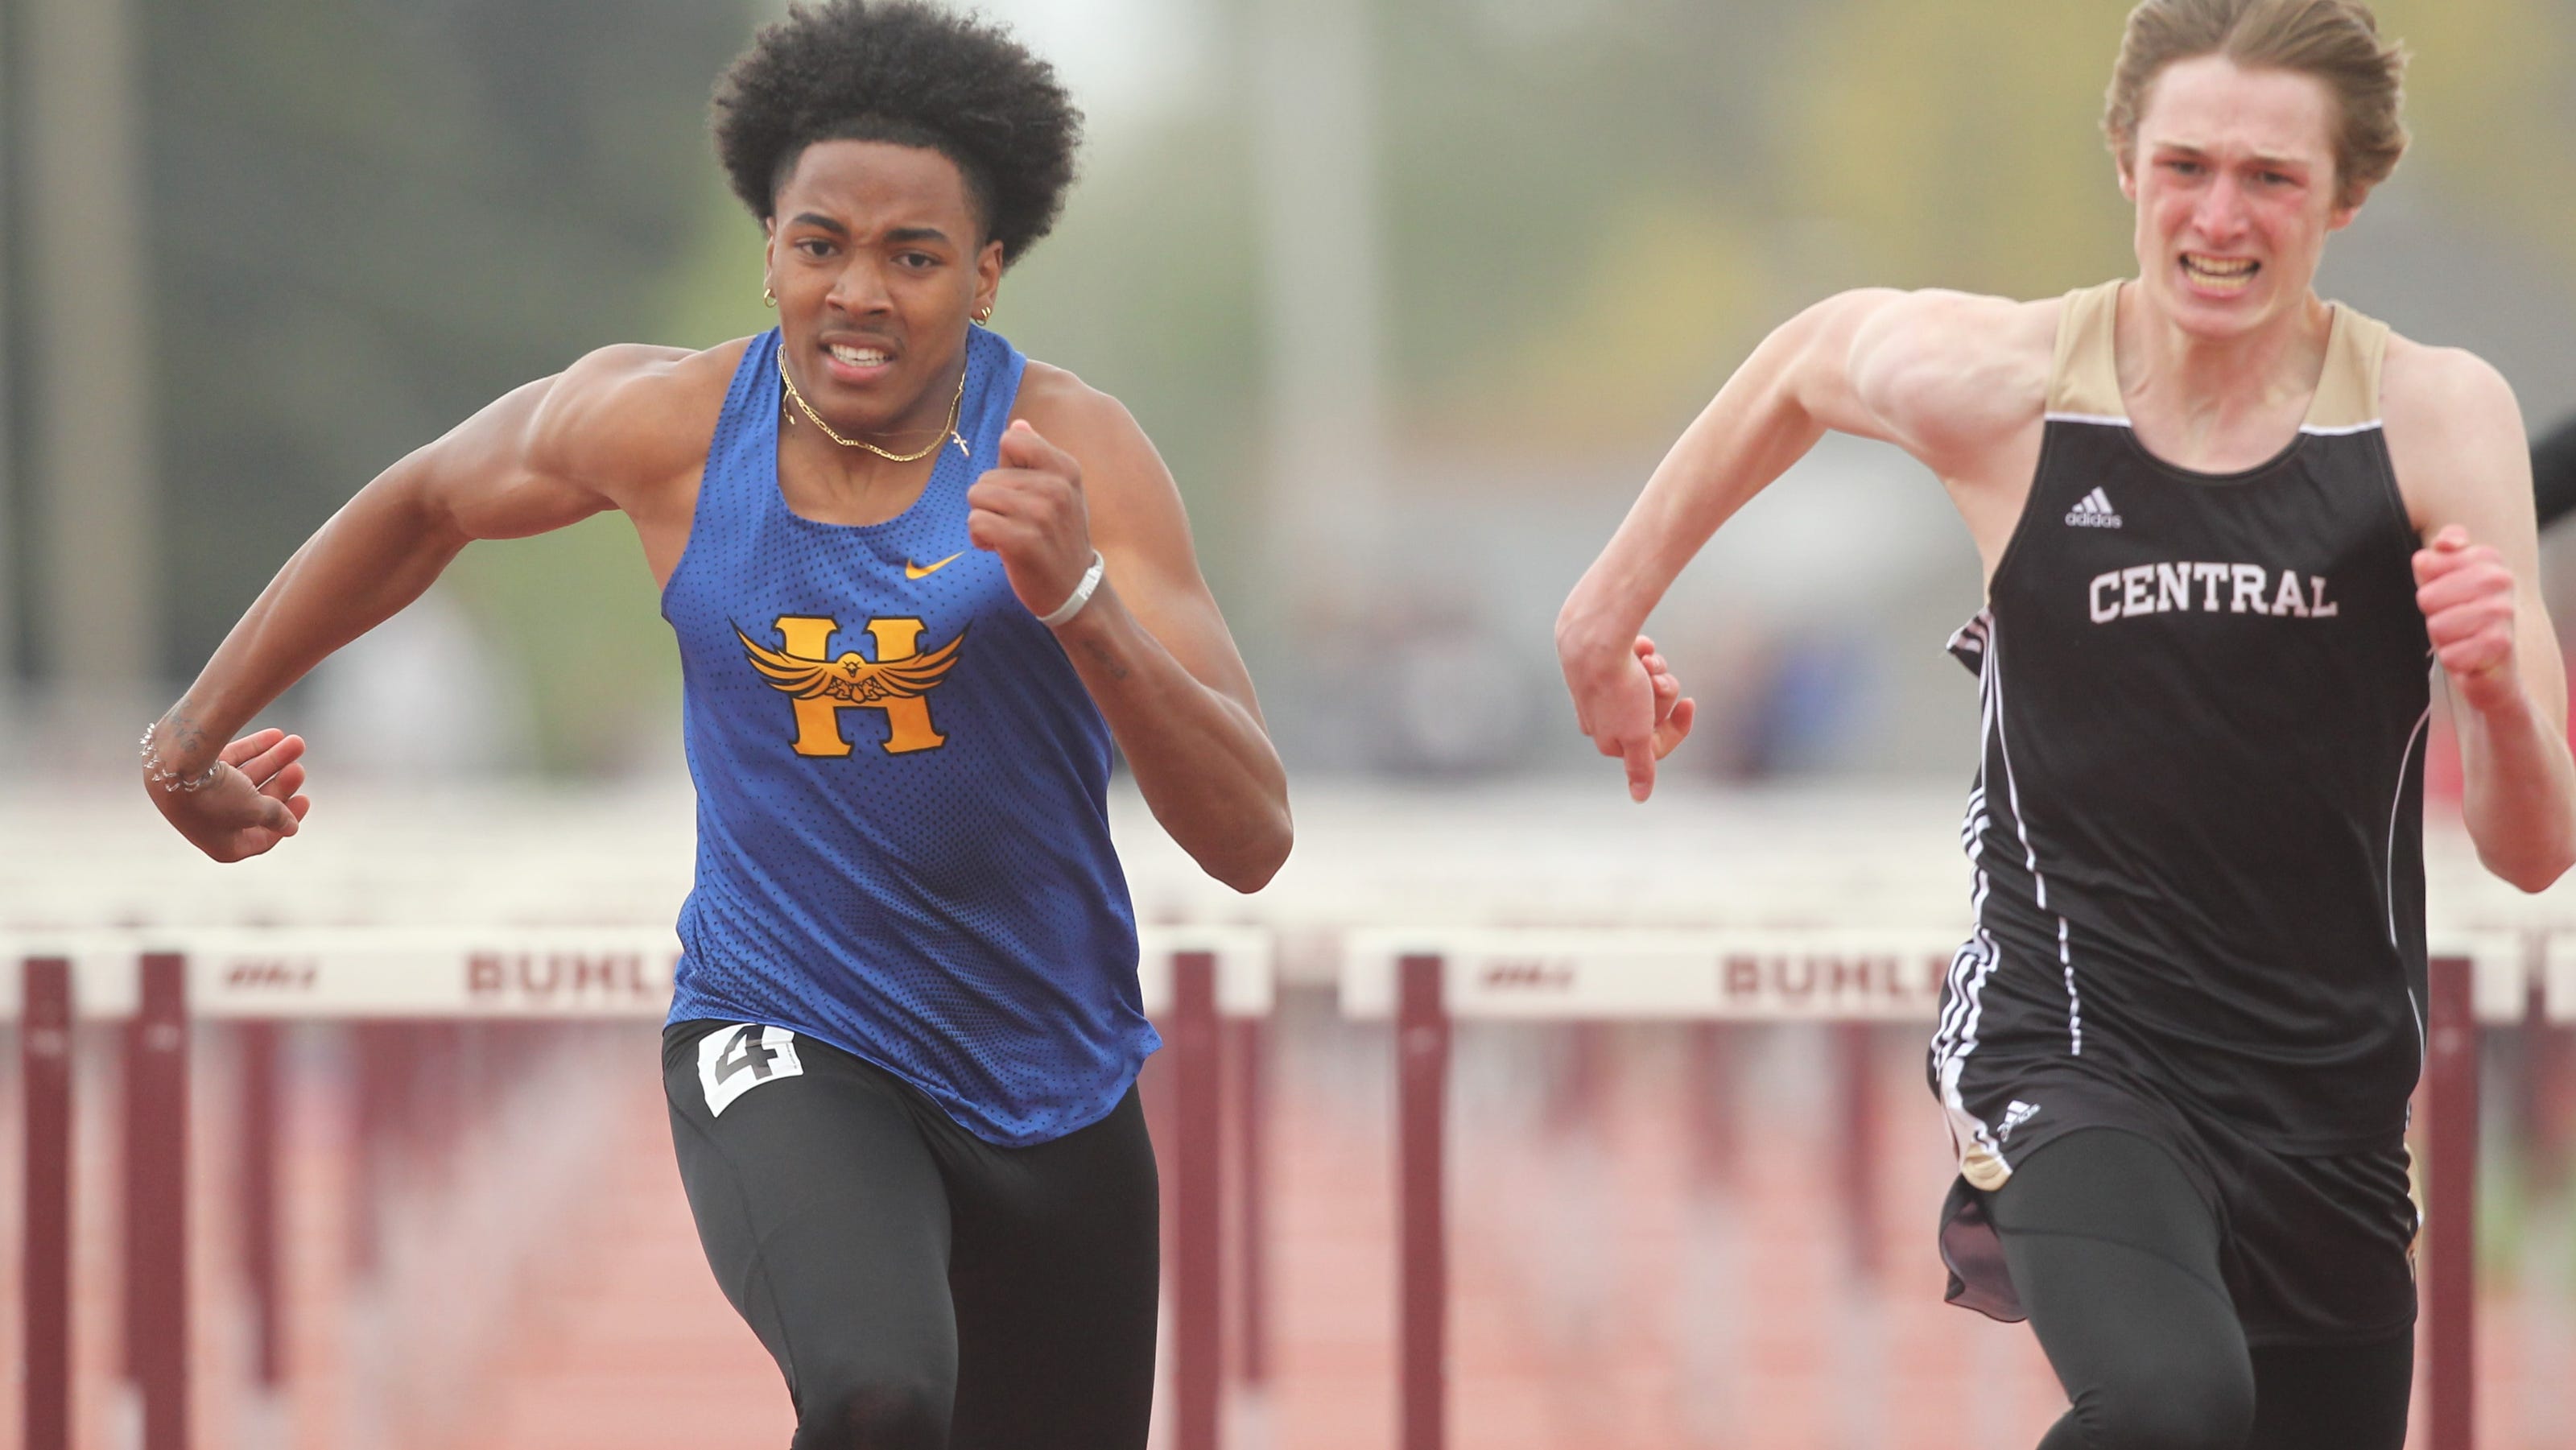 Reno County athletes to watch at Kansas state track and field meet